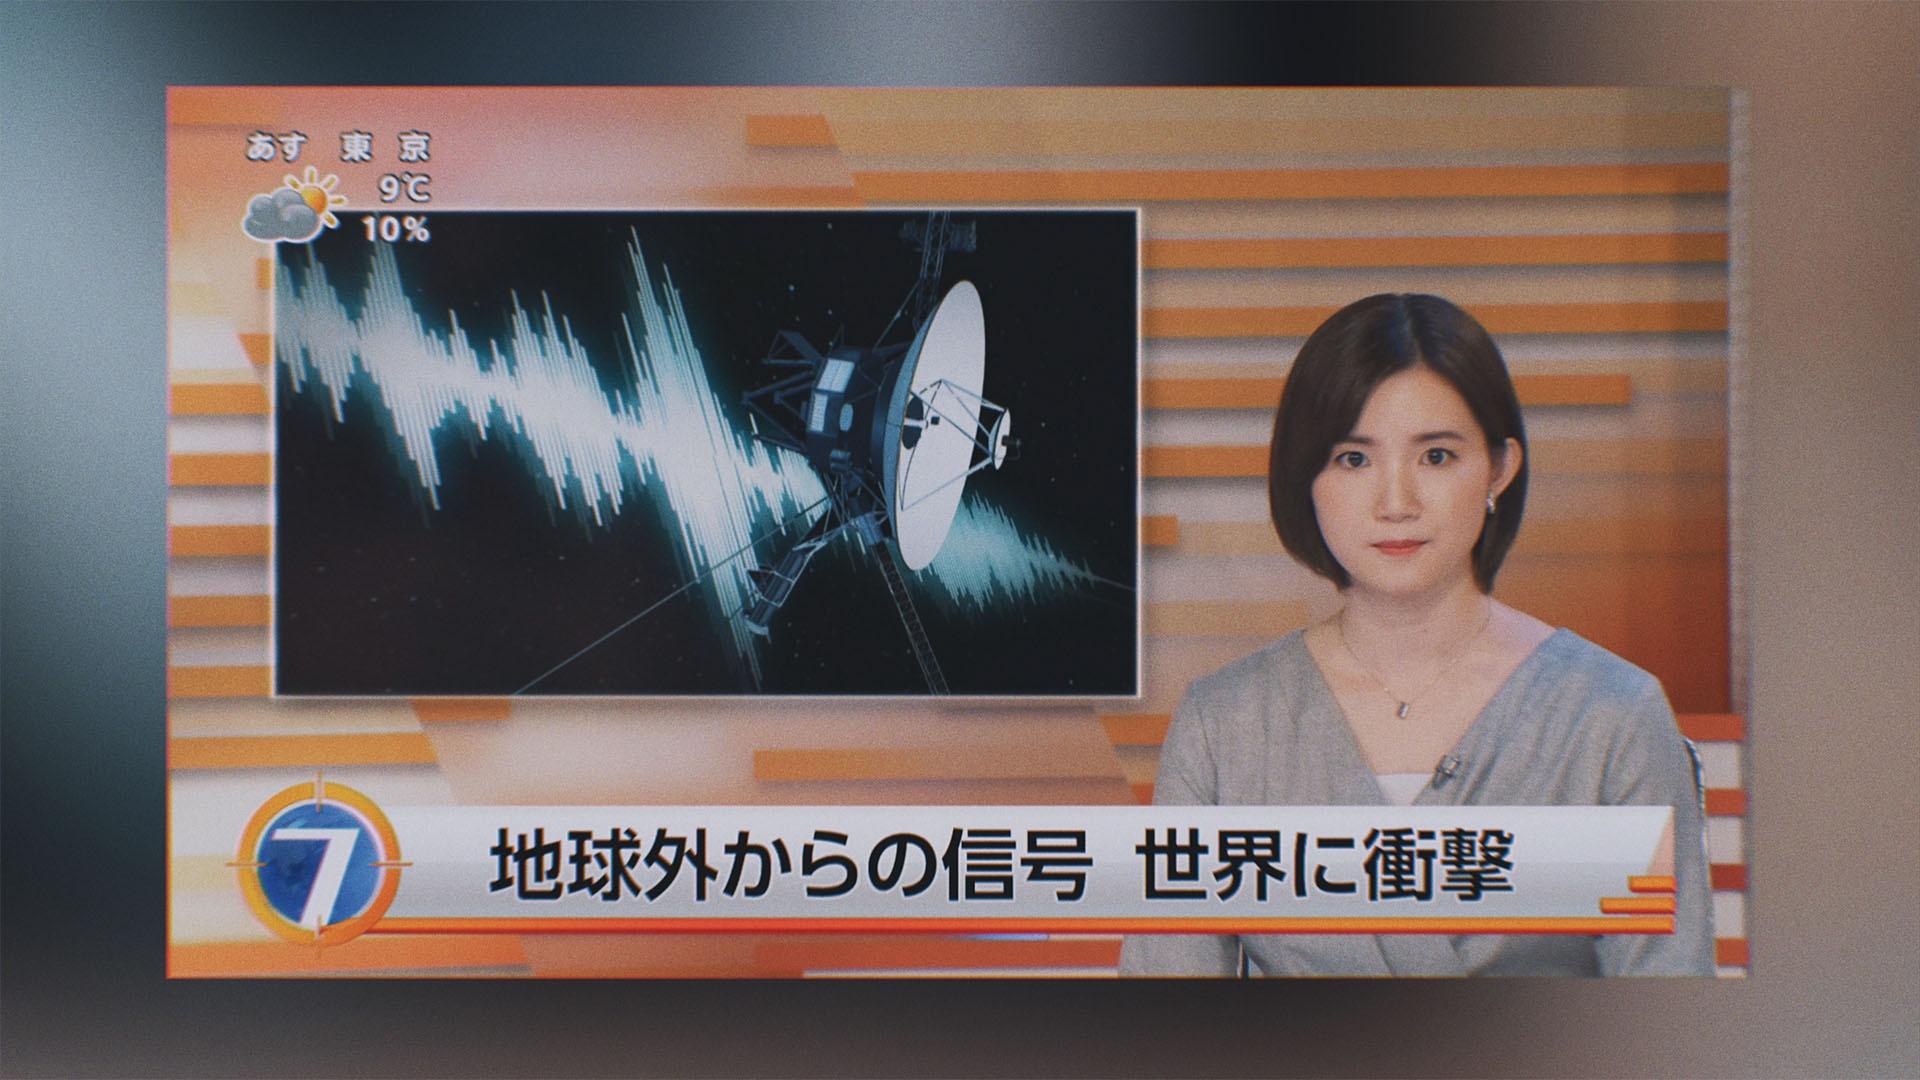 Image of a fictional Japanese news presenter reporting.